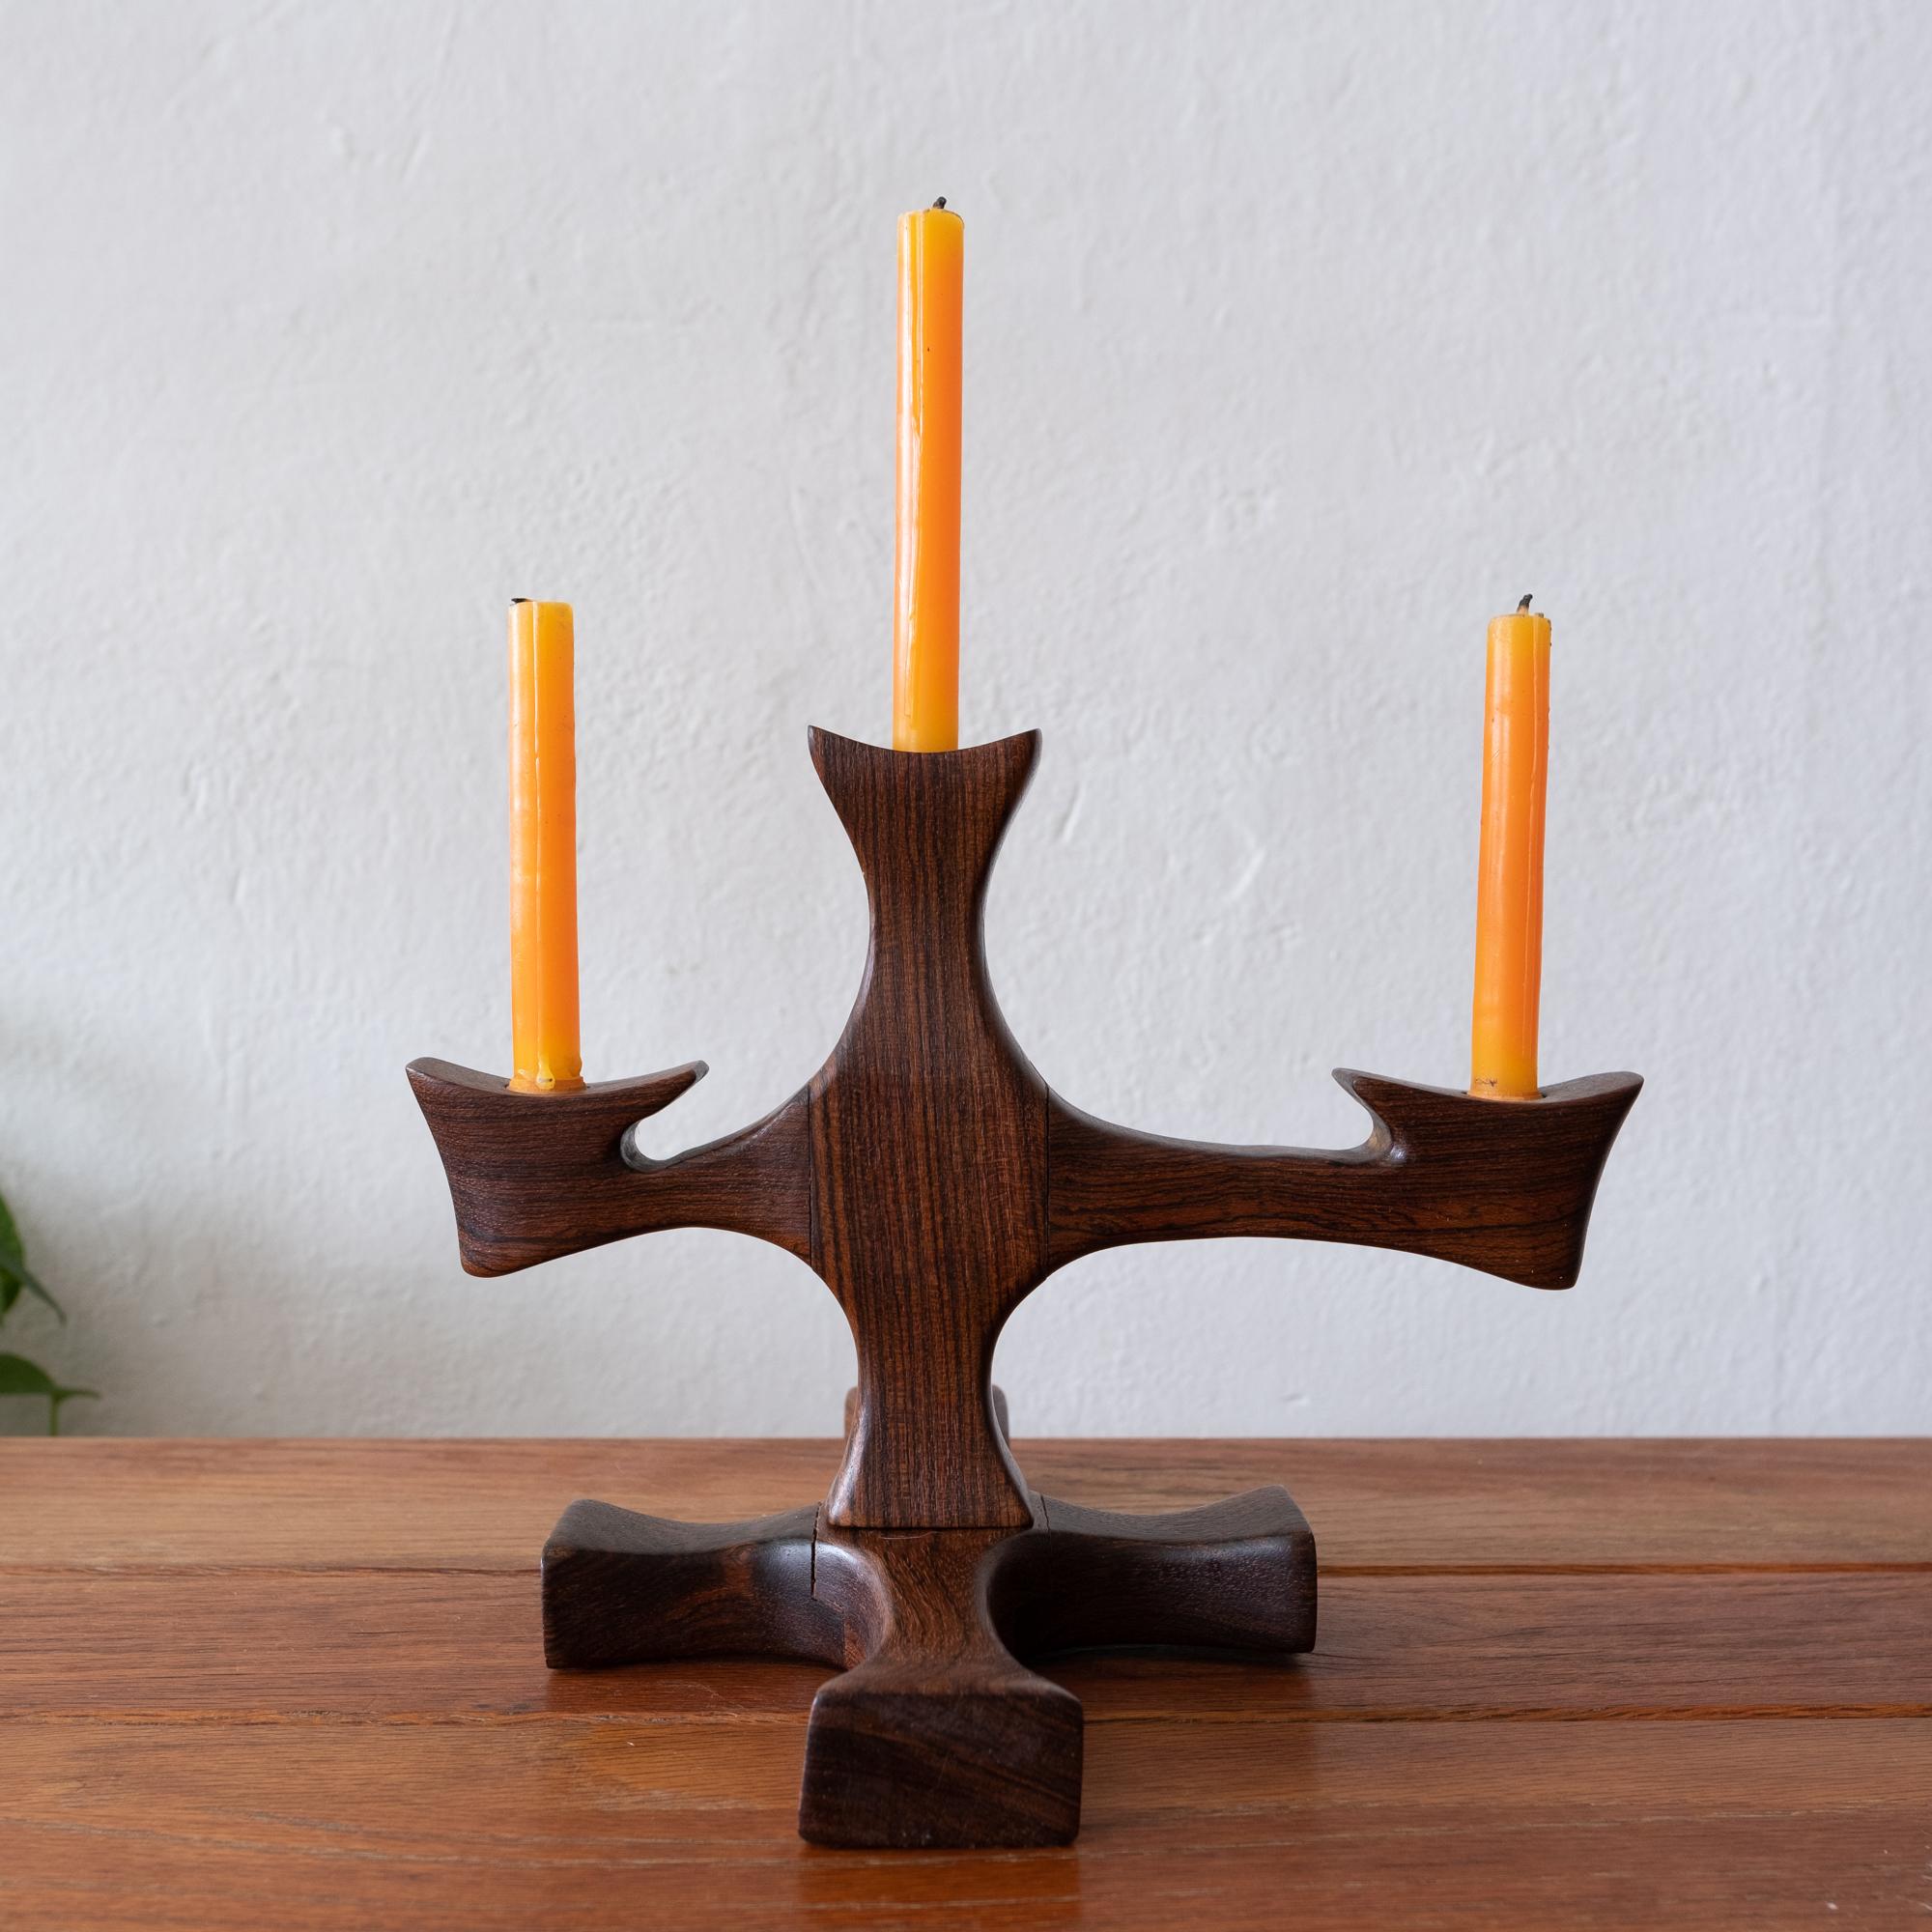 Hand carved candleholder in Cocobolo by Mexican Modernist Don Shoemaker. Retains original candles and labels from his workshop in Señal Mexico. This design was included in the 2017 Don S. Shoemaker exhibition at the Museo de Arte Moderno in Mexico